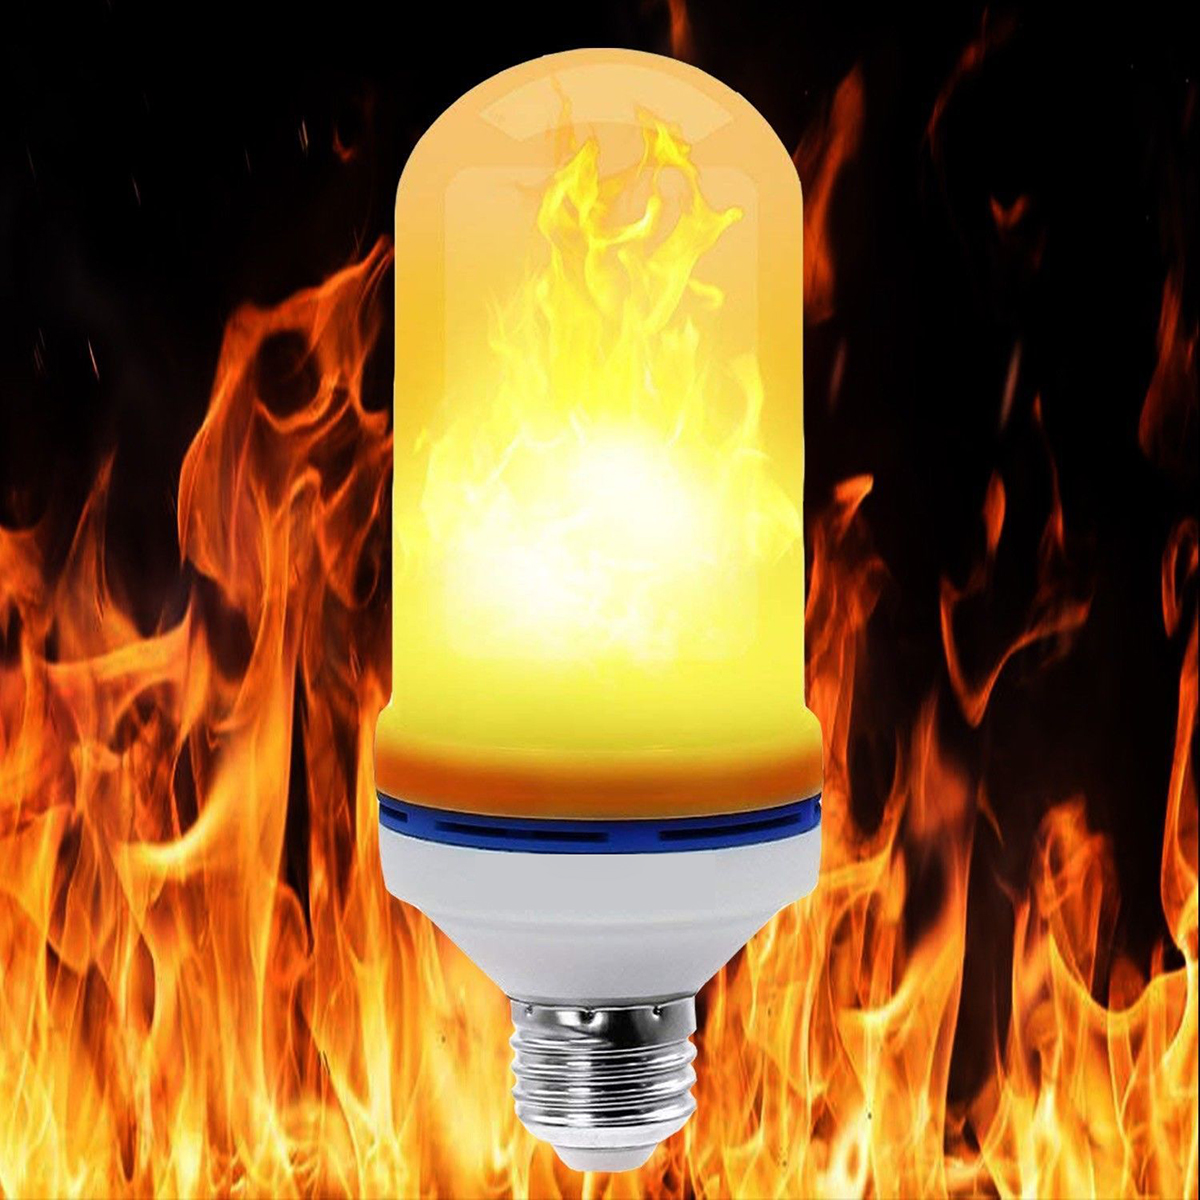 

AC85-265V E27 3W 3 Modes LED Flame Effect Fire Light Bulb Flickering Emulation Party Lamp